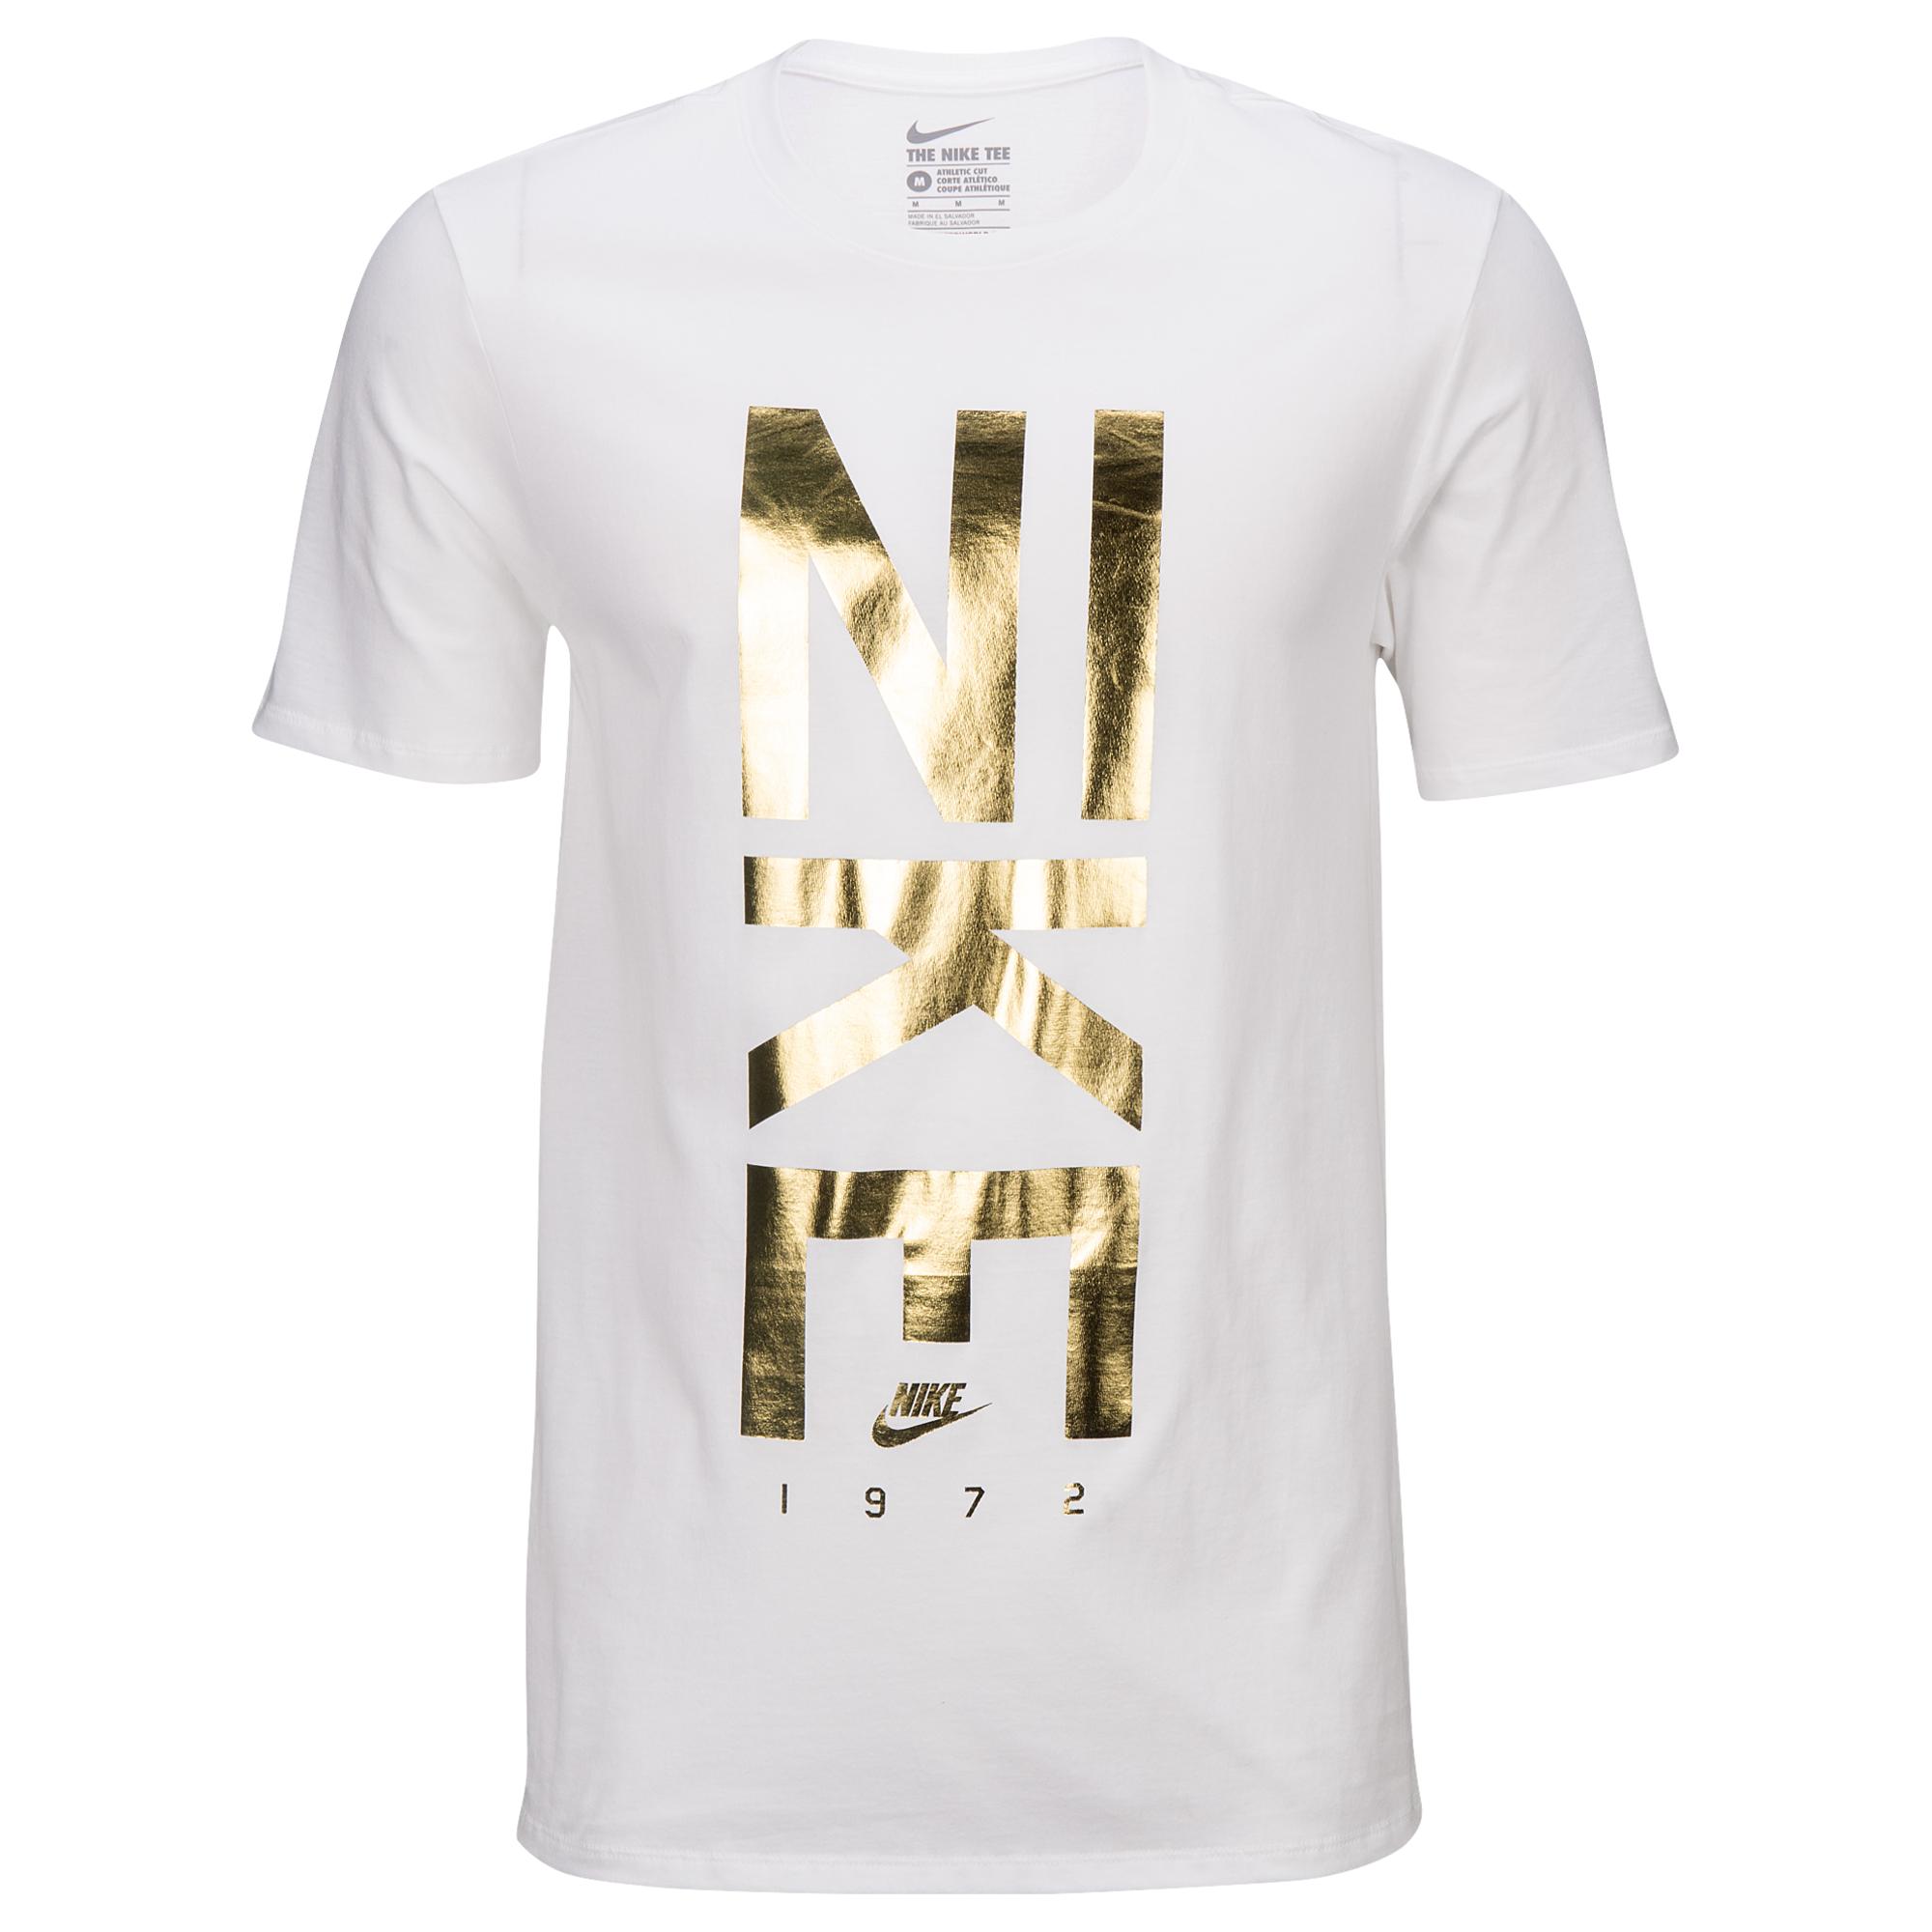 Nike Cotton Graphic T-shirt in White ...